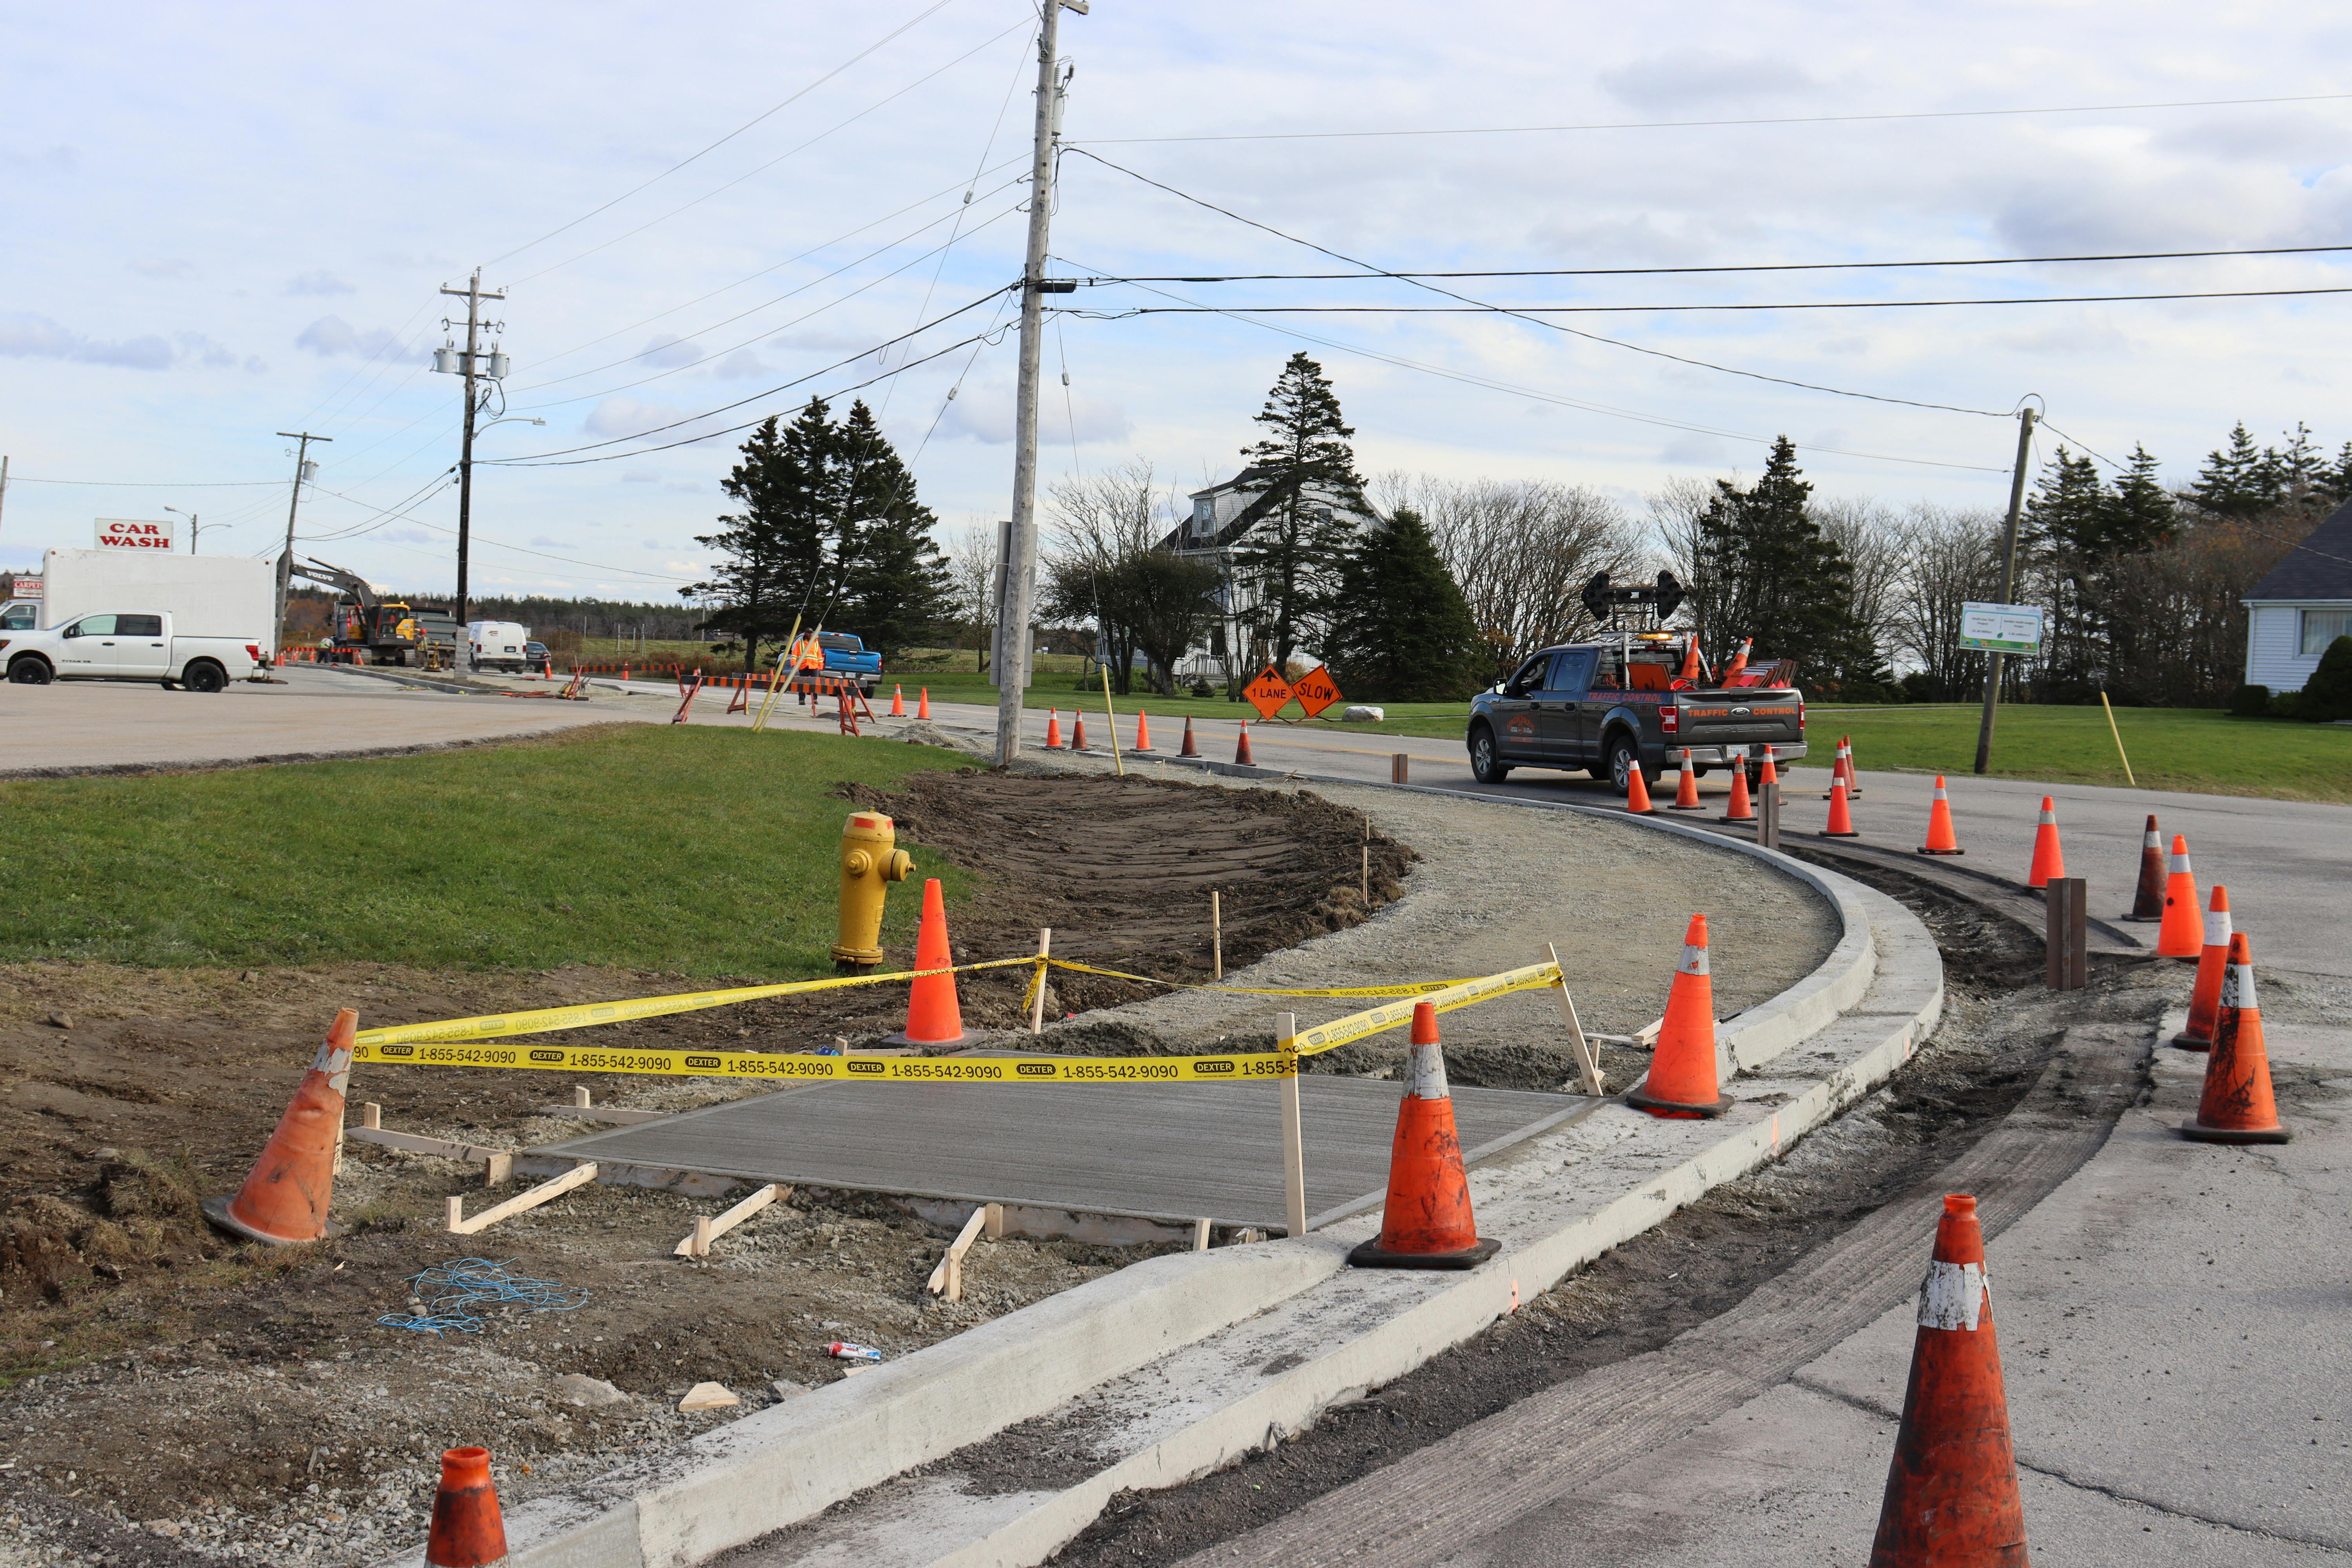 Curbing and trail development at the corner of Haley Road and Parade Street.